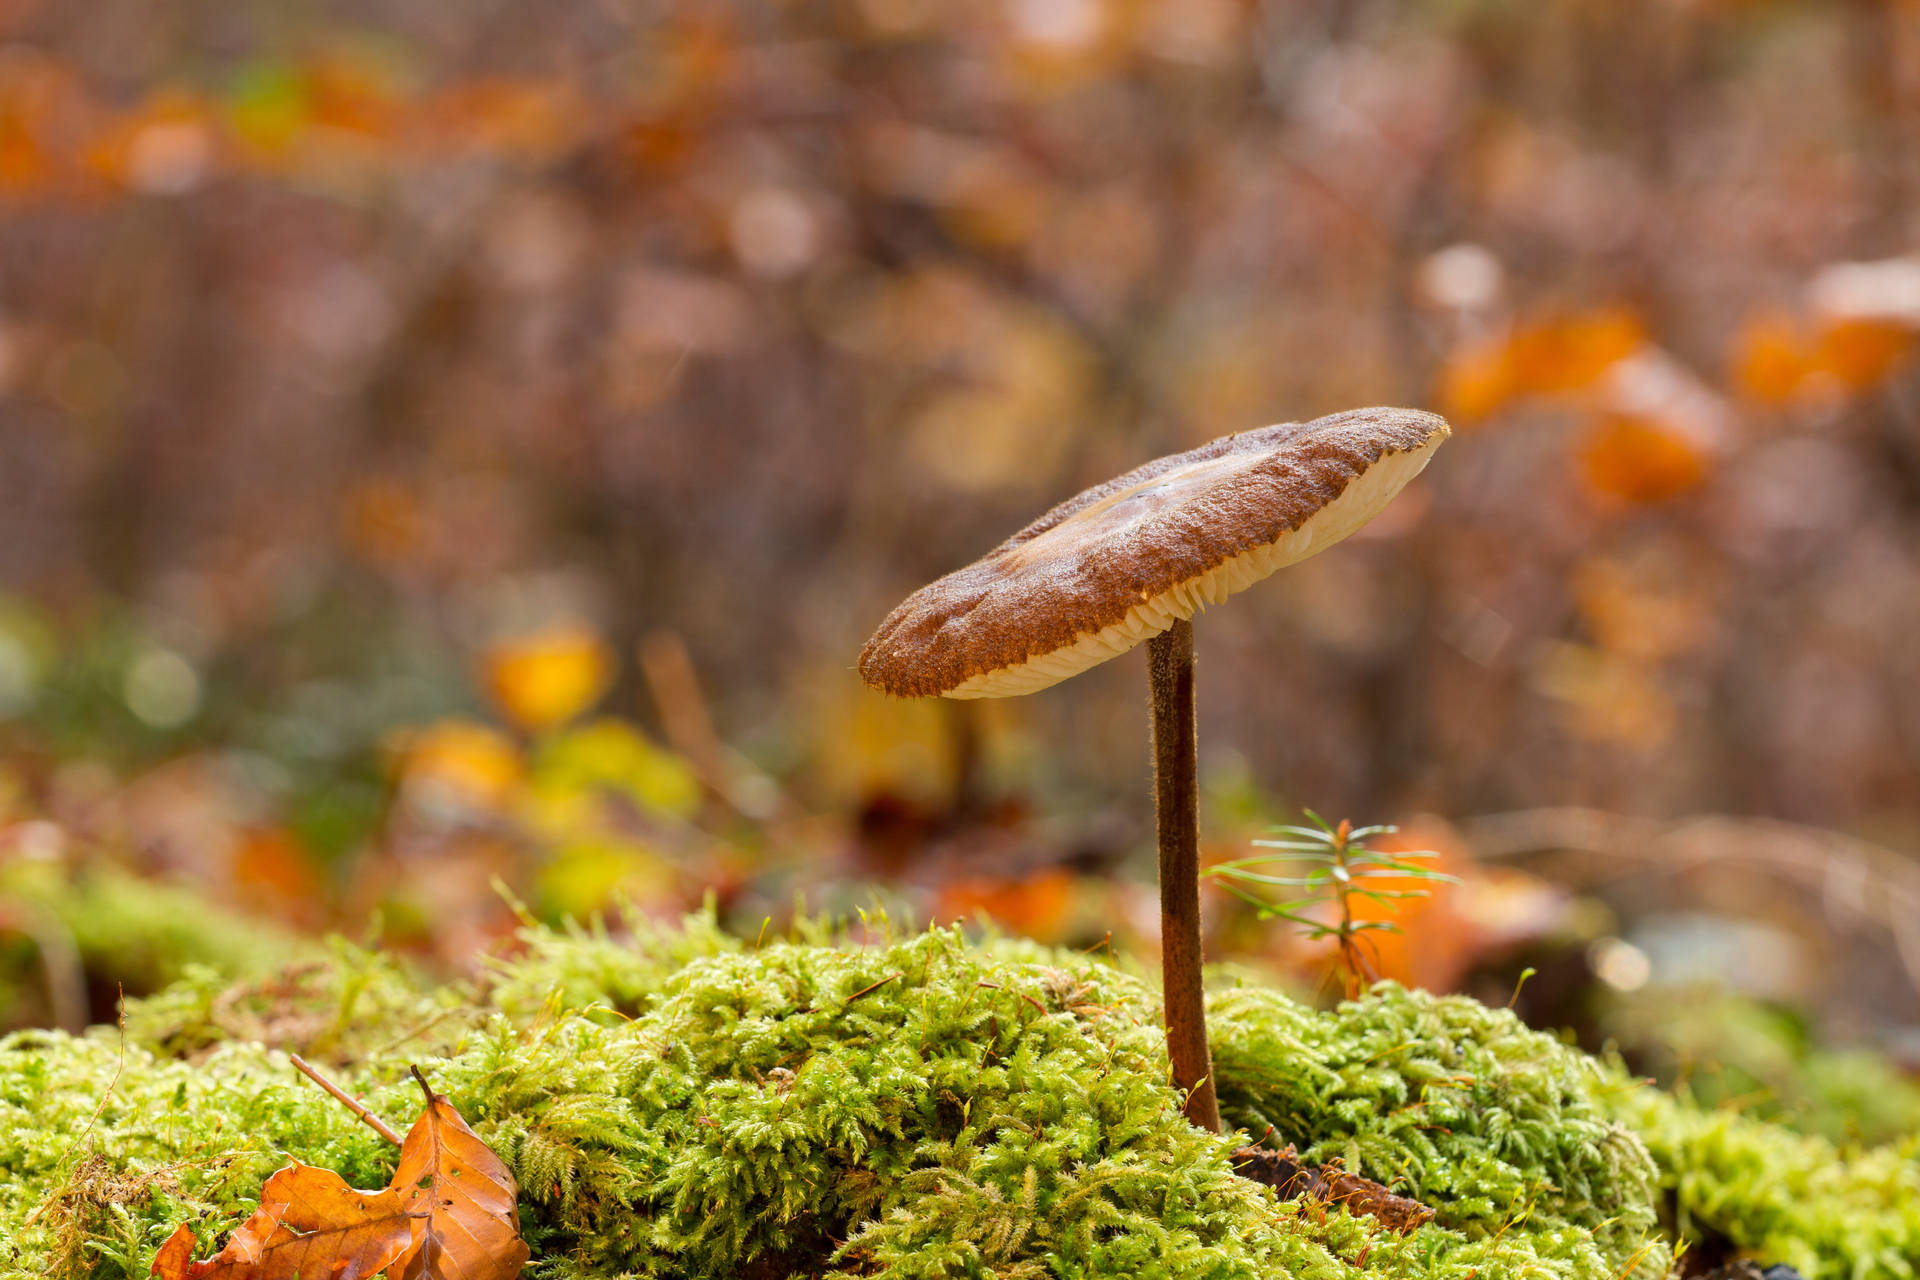 Cute Mushroom With Tilted Cap On Moss Background